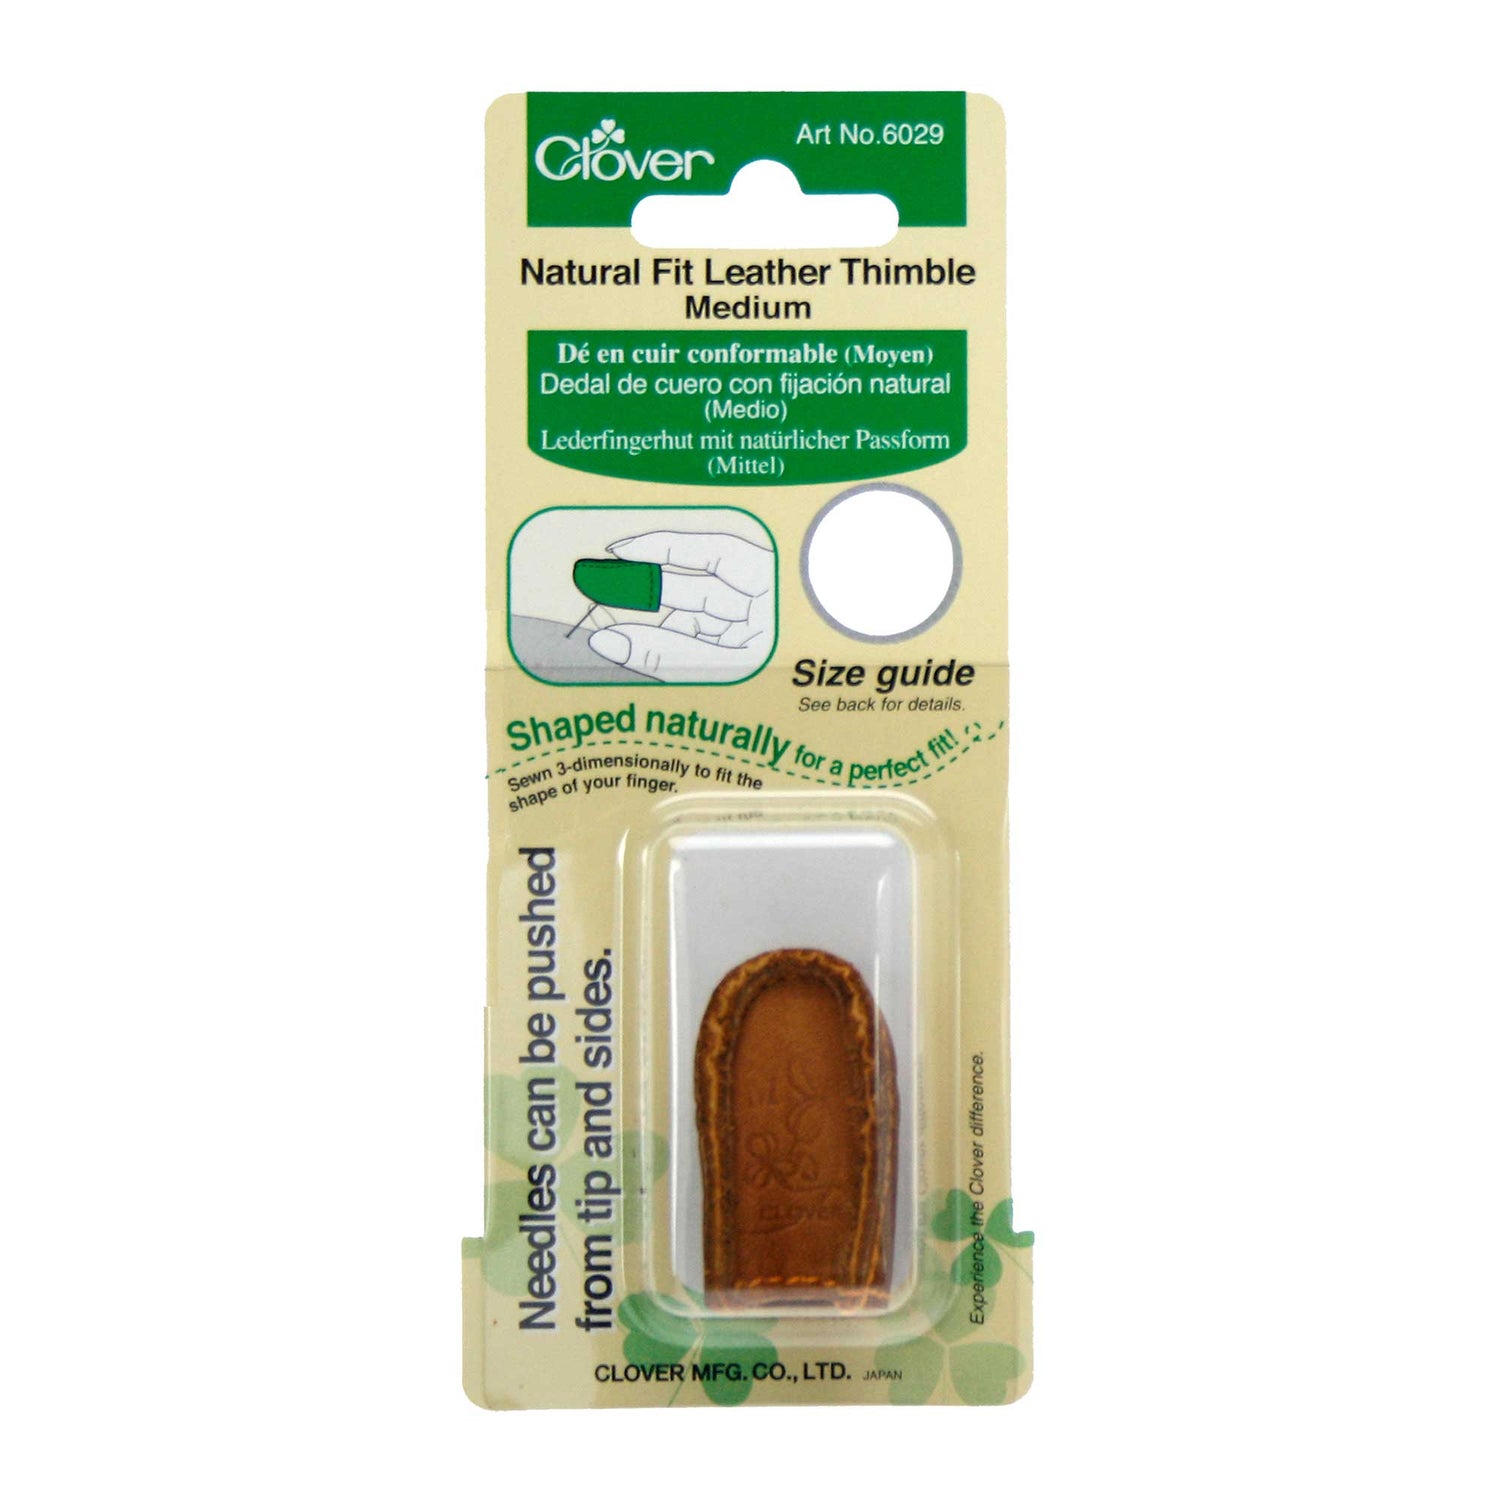 Clover Natural Fit Leather Thimble | Medium